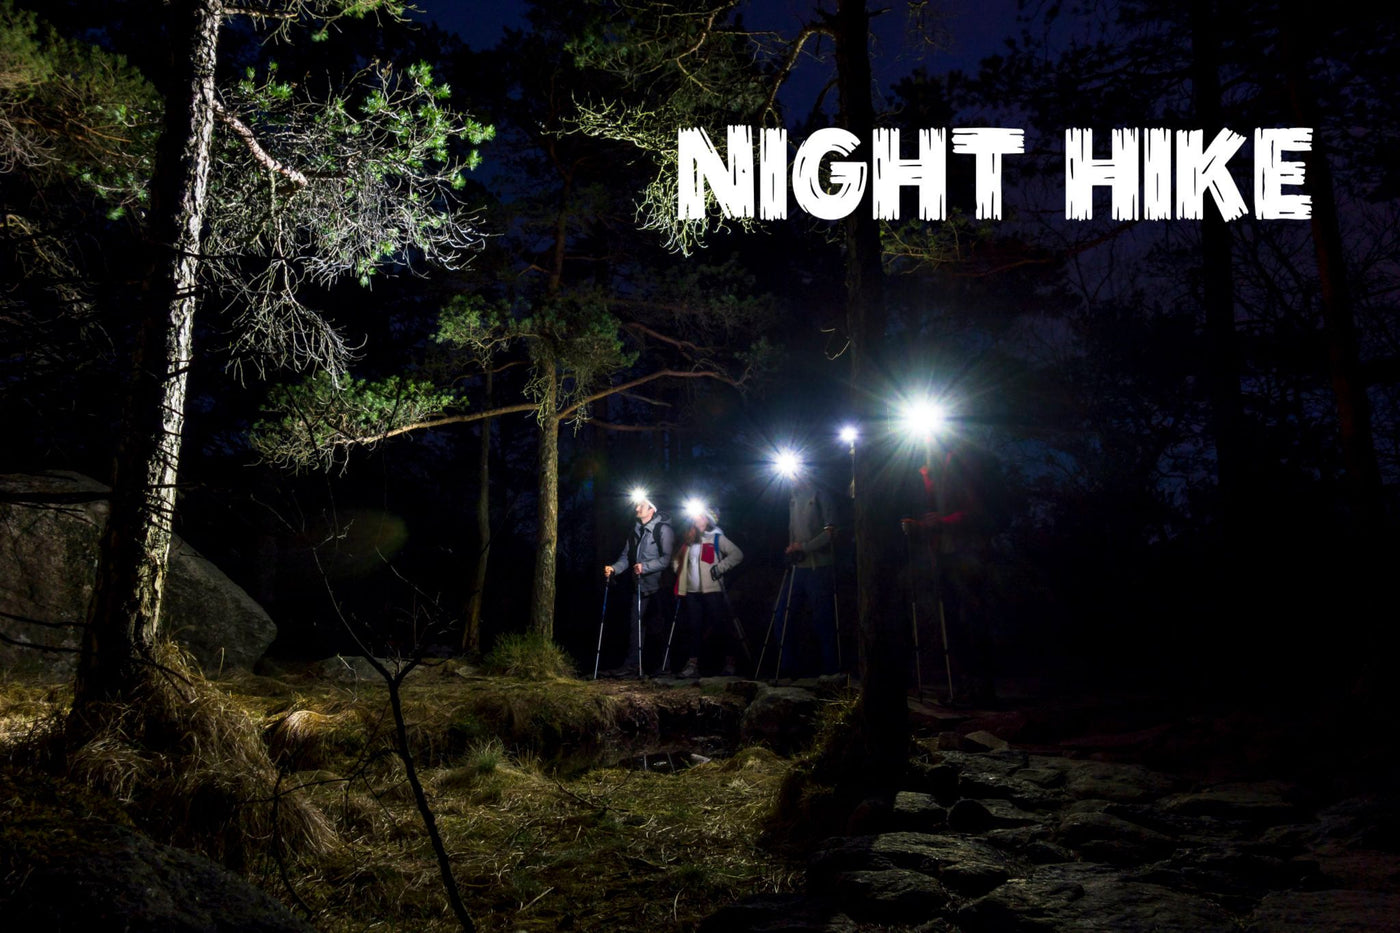 Halloween Night Hike (Tickets sold out, thanks for support!)